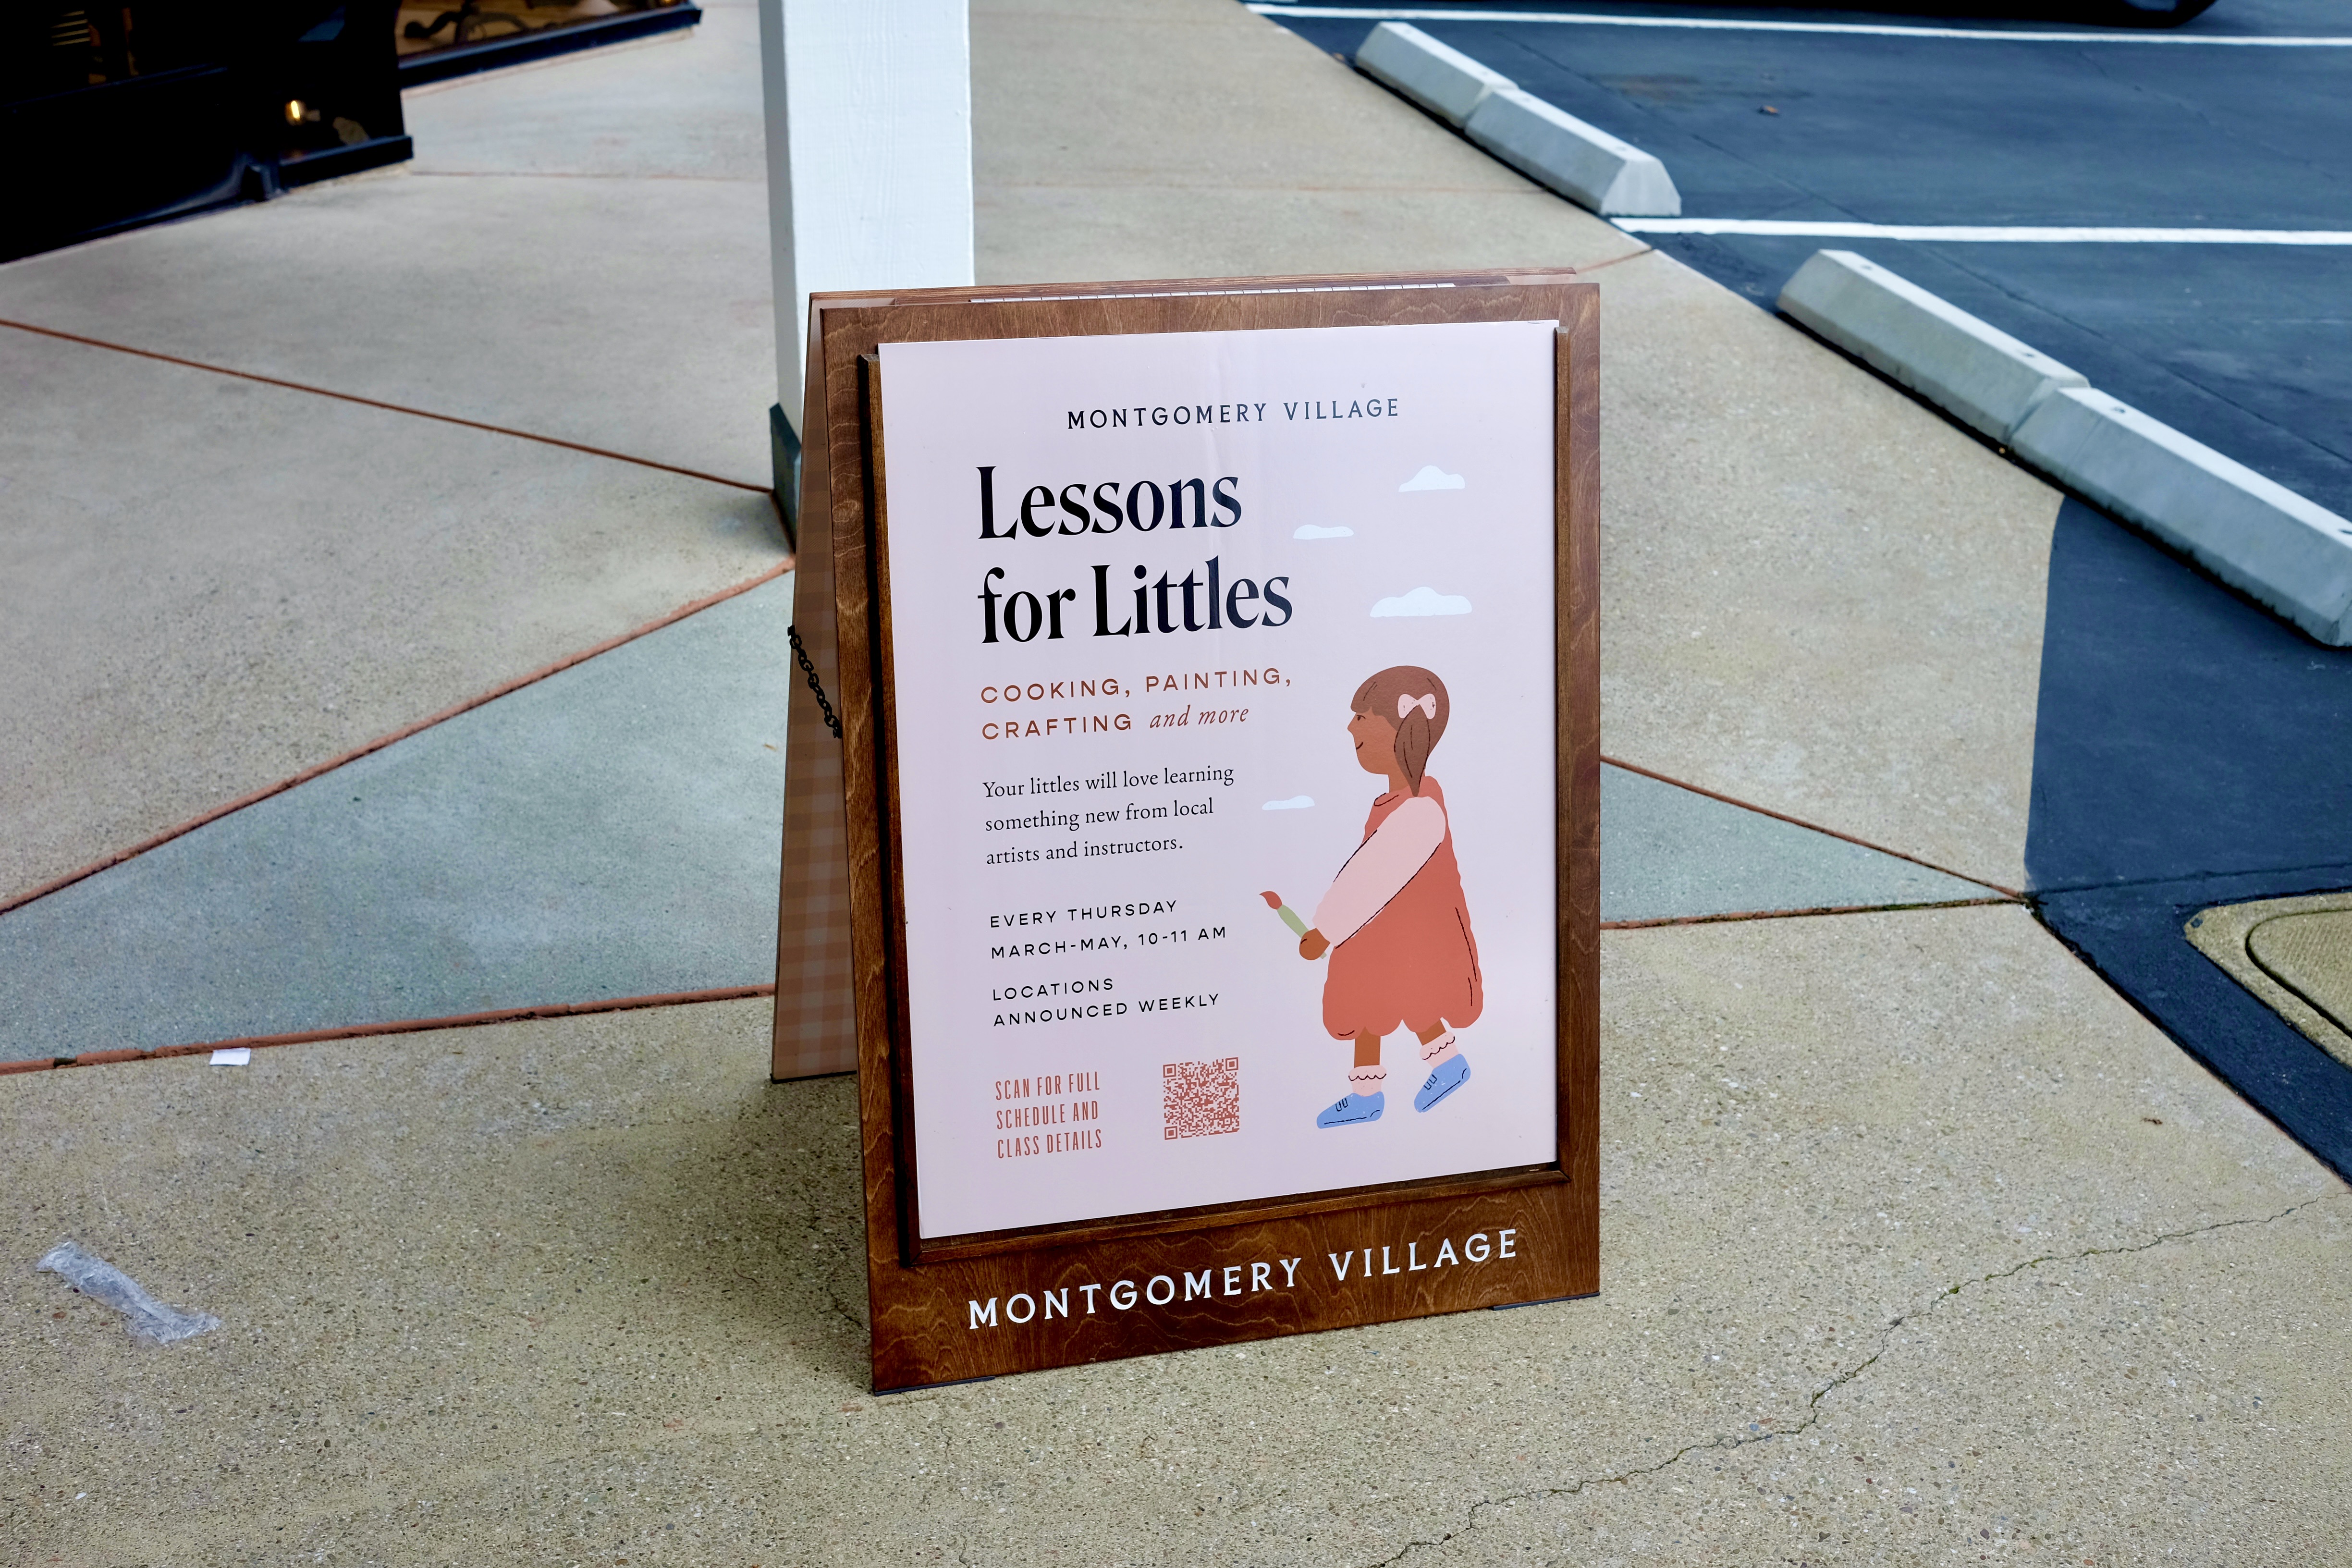 A sign says "Lessons for Littles," with a drawing of a child holding a paintbrush.